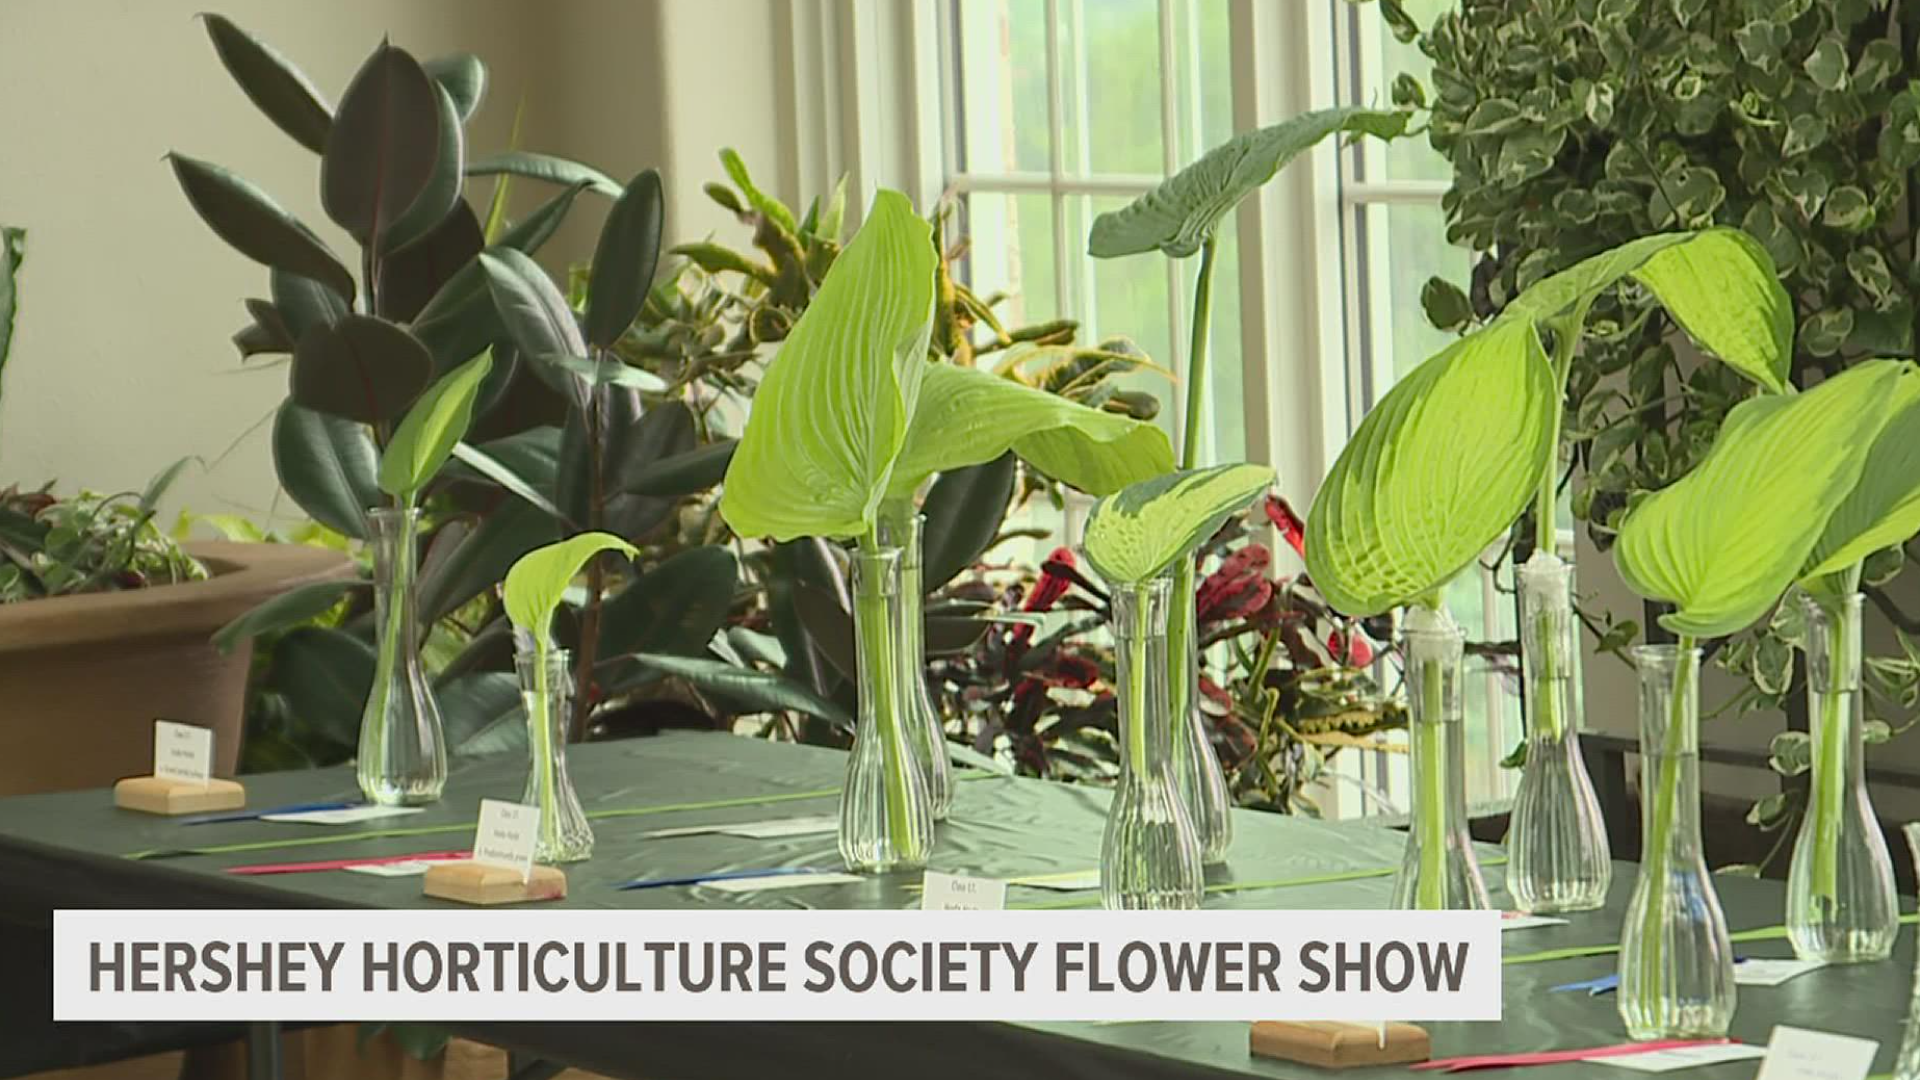 The flower show was judged by the National Garden Club.